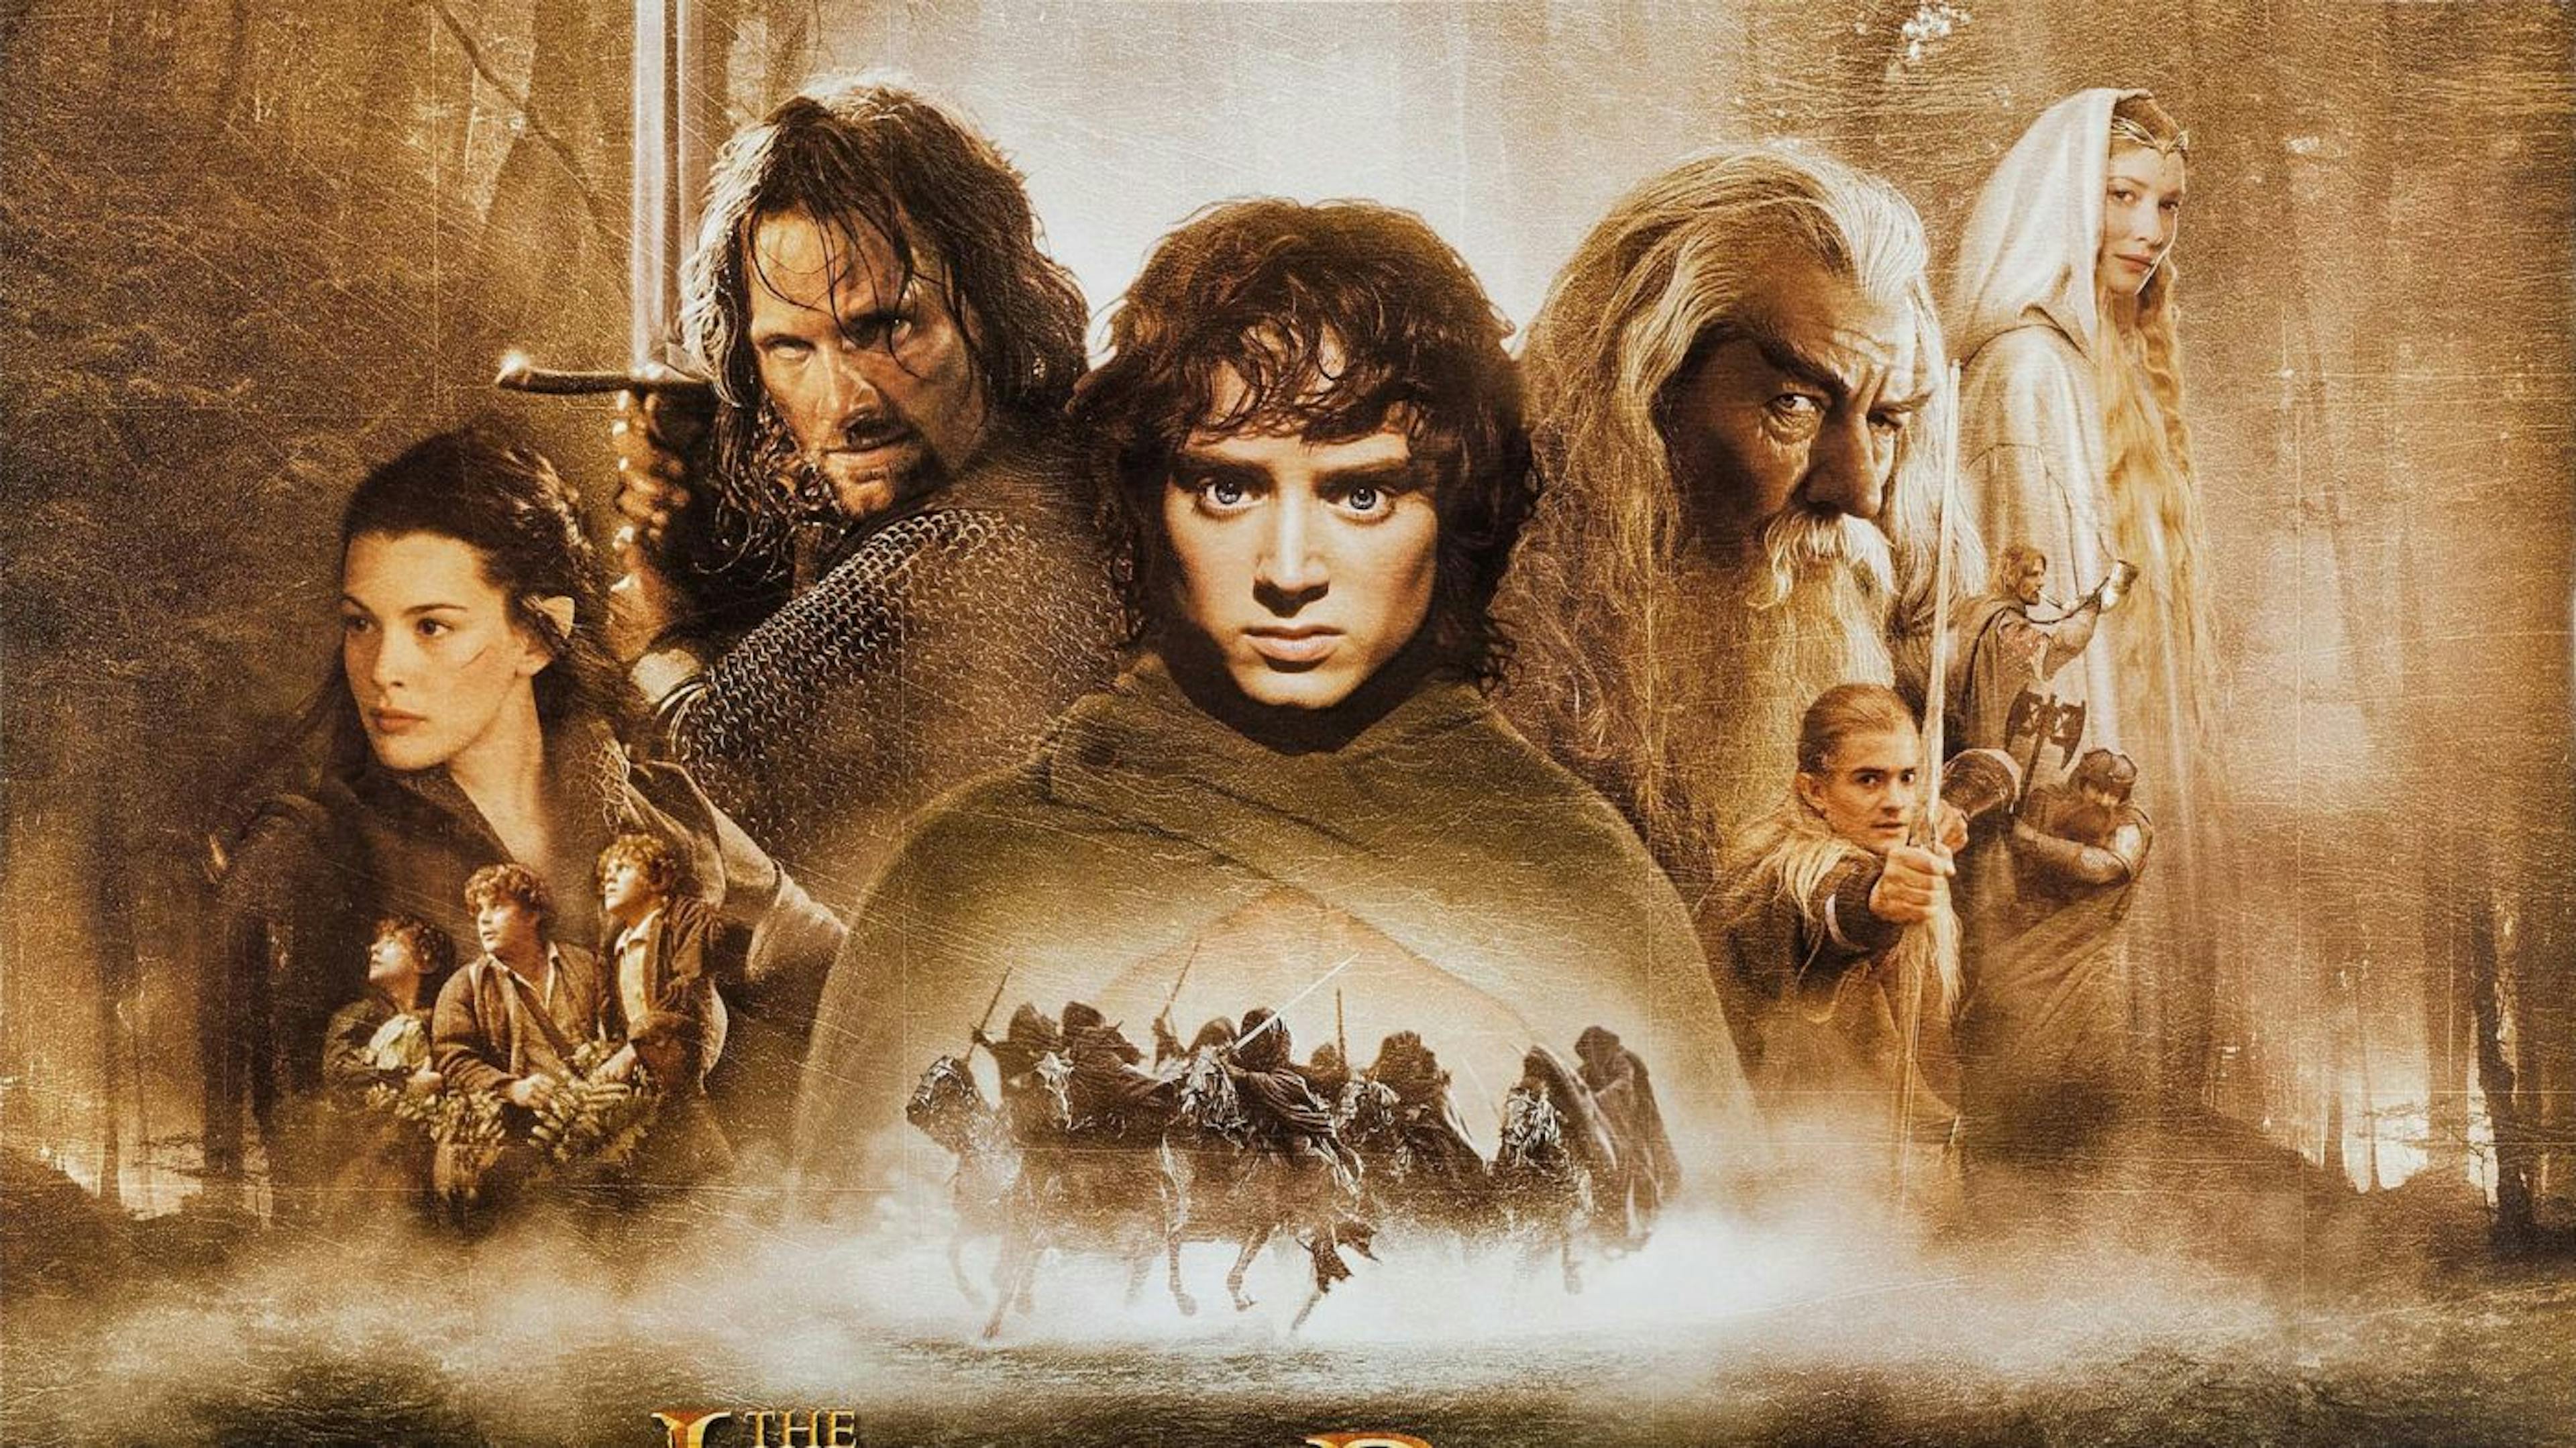 featured image - The Lord of the Rings Movies in Order